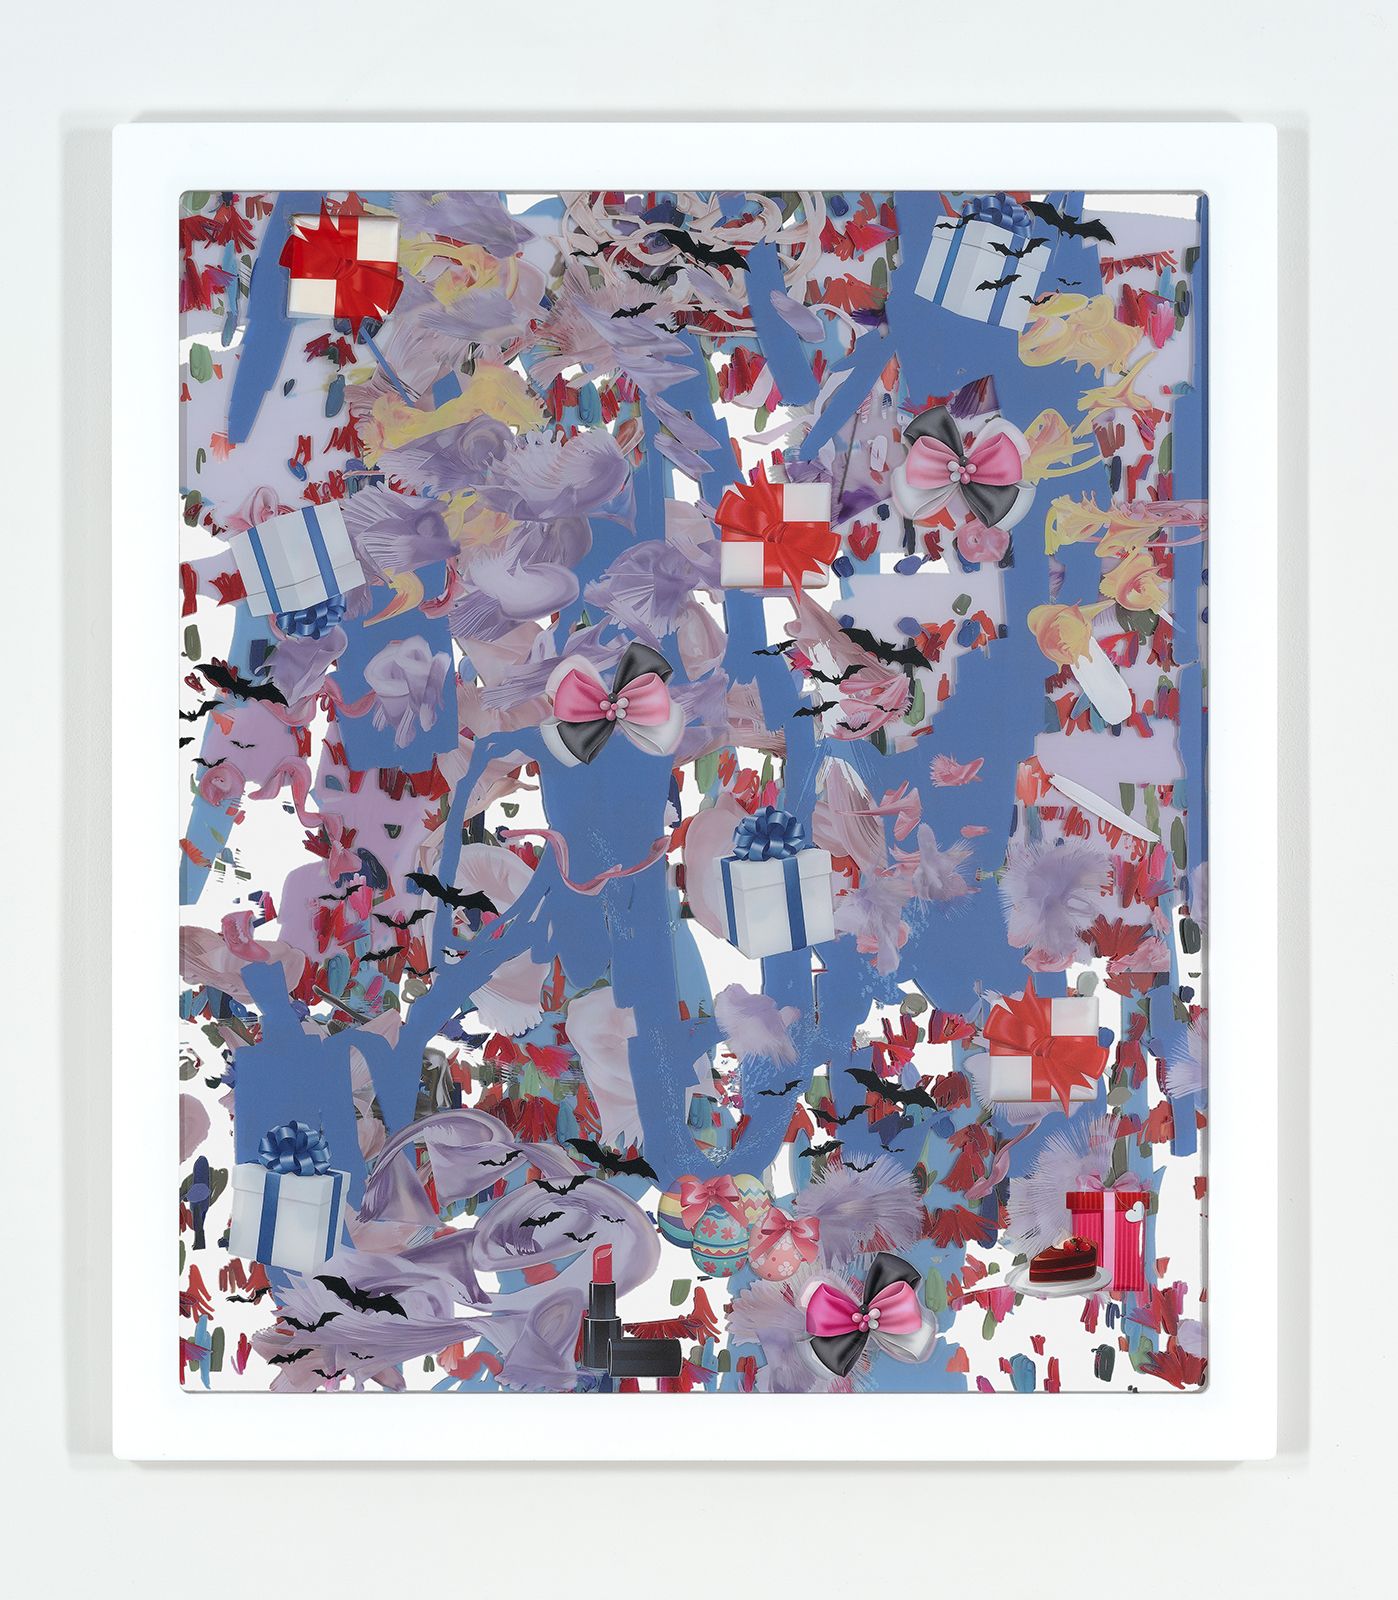 Petra Cortright, Slayer Spoilers, 2015, digital painting, UV print on clear acrylic and stickers, mounted on mirrored acrylic, 54 1⁄2 × 47 1⁄2 × 1 1⁄4 in.